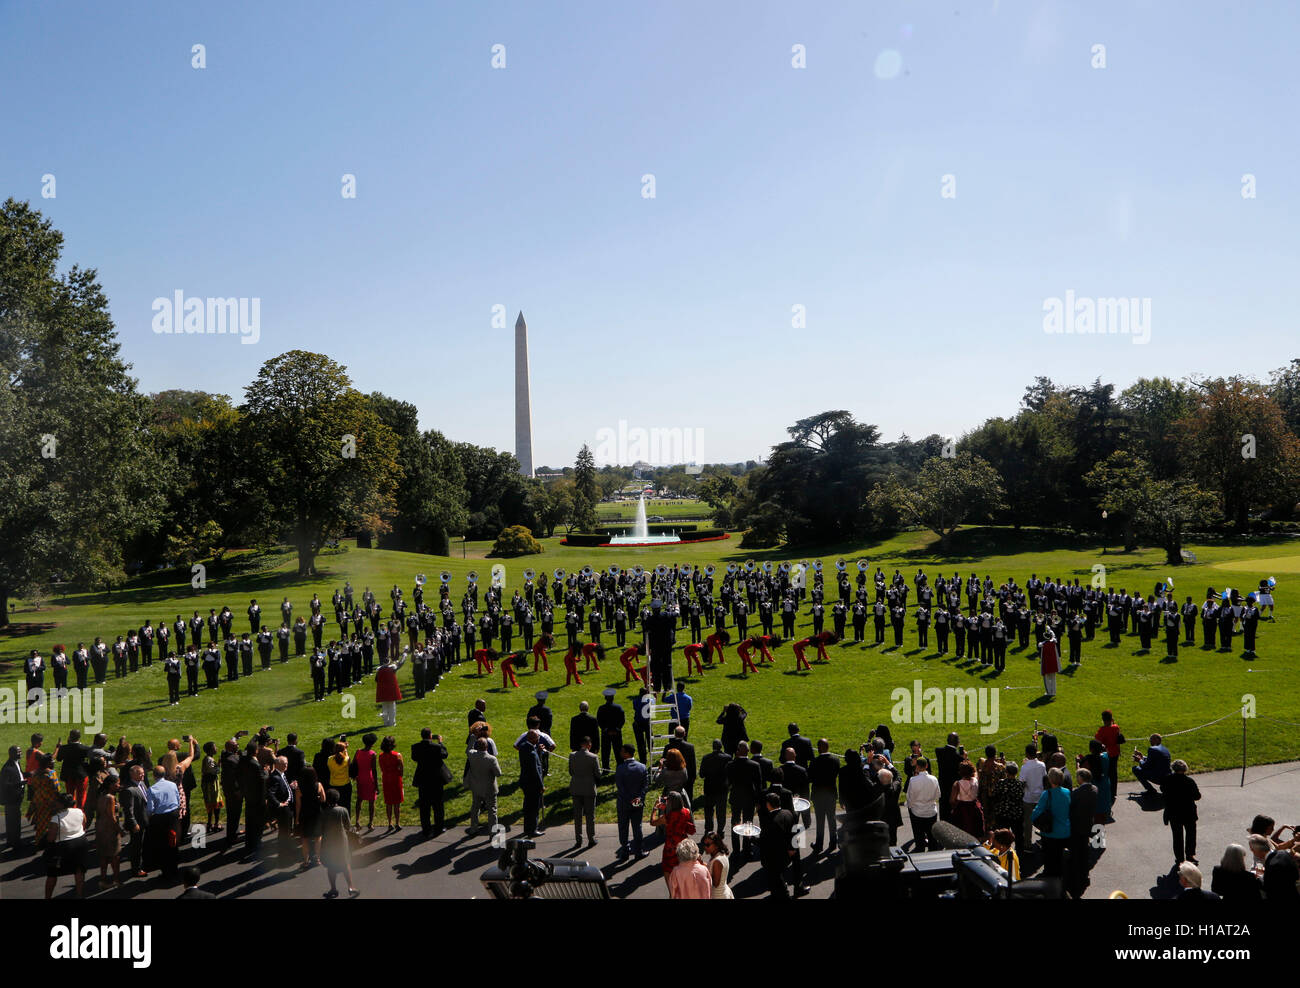 Washington DC, USA. 23rd Sep, 2016. The Tennessee State Marching Band performs on the South Lawn of the White House during a reception in honor of the opening of the Smithsonian National Museum of African American History and Culture September 22, 2016, Washington, DC. (Pool/Aude Guerrucci) Credit: Aude Guerrucci/Pool via CNP /MediaPunch Credit:  MediaPunch Inc/Alamy Live News Stock Photo